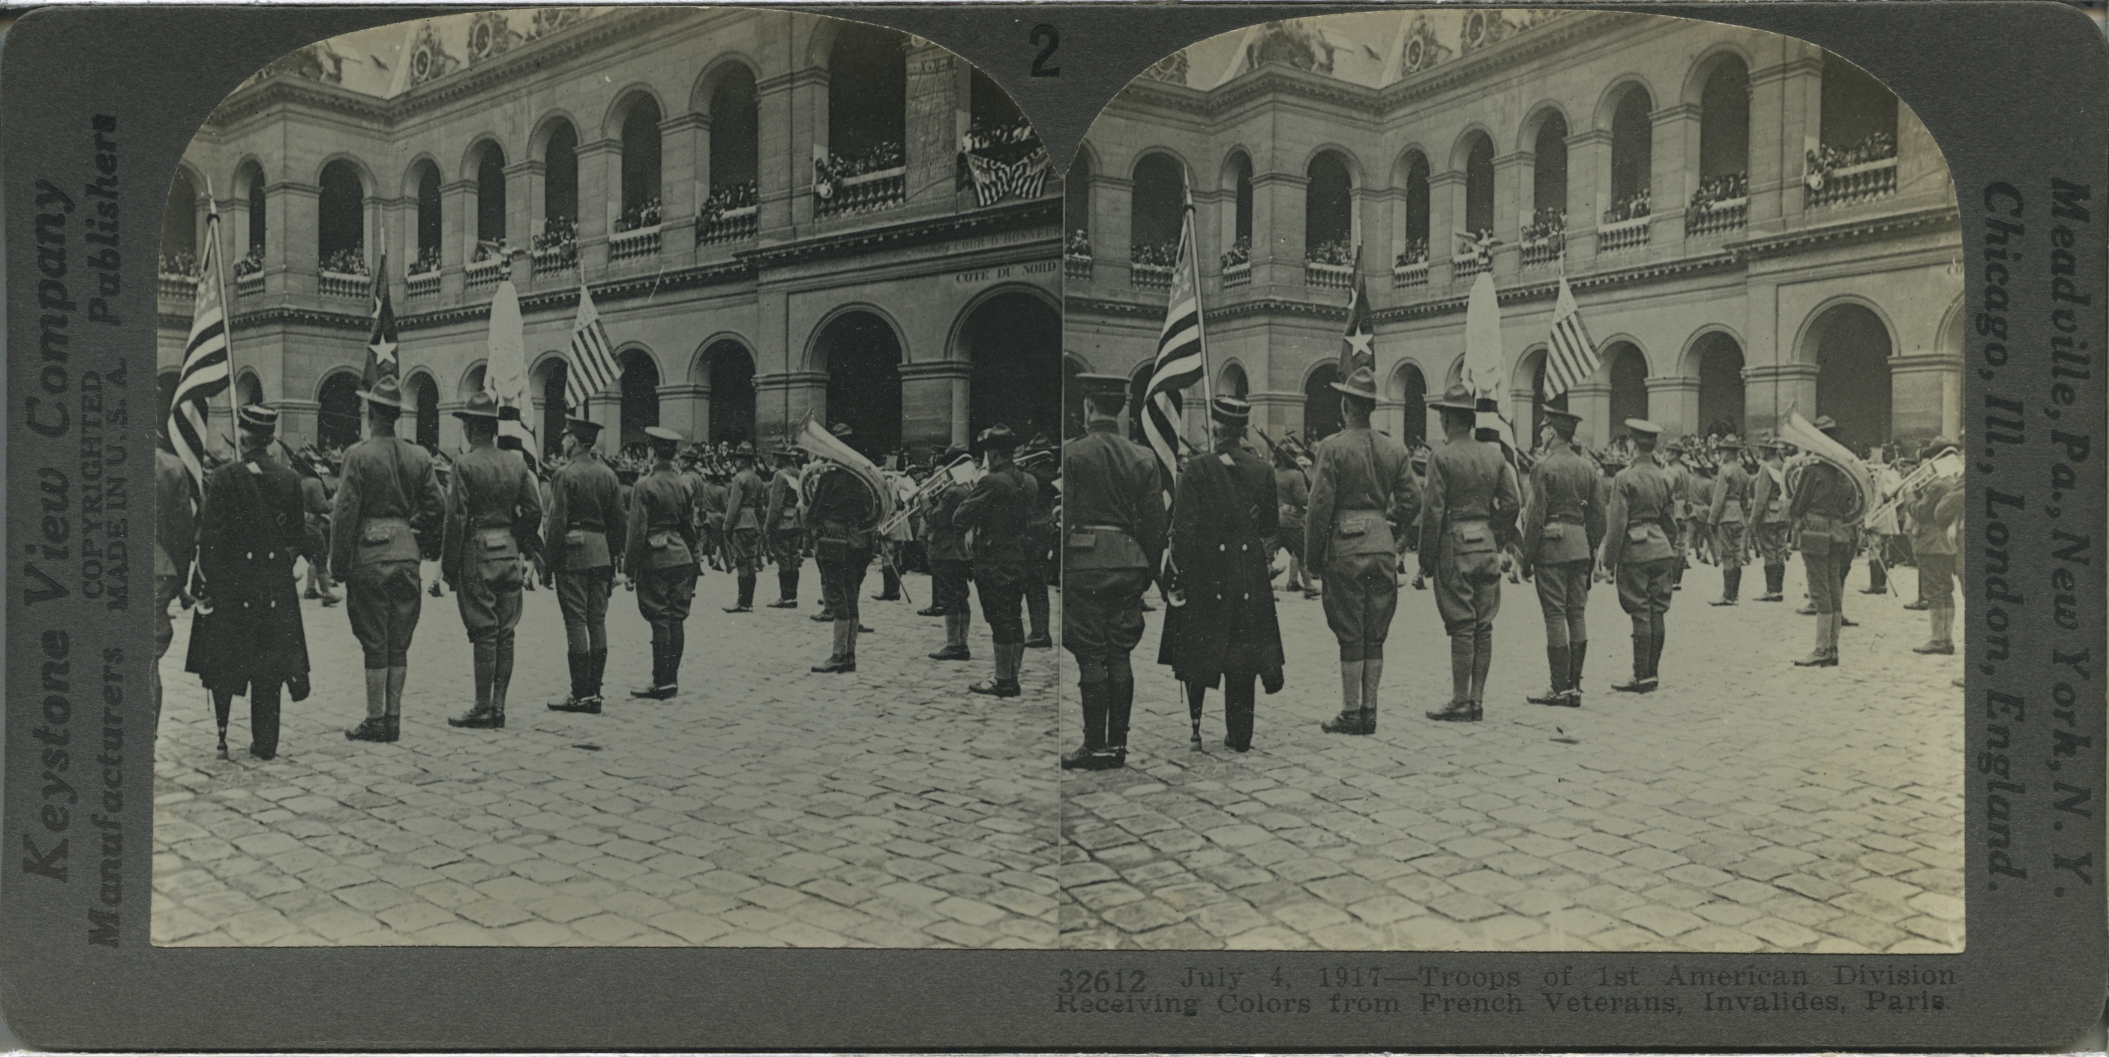 July 4, 1917 - Troops of 1st American Division Receiving Colors from French Veterans, Invalides, Paris.